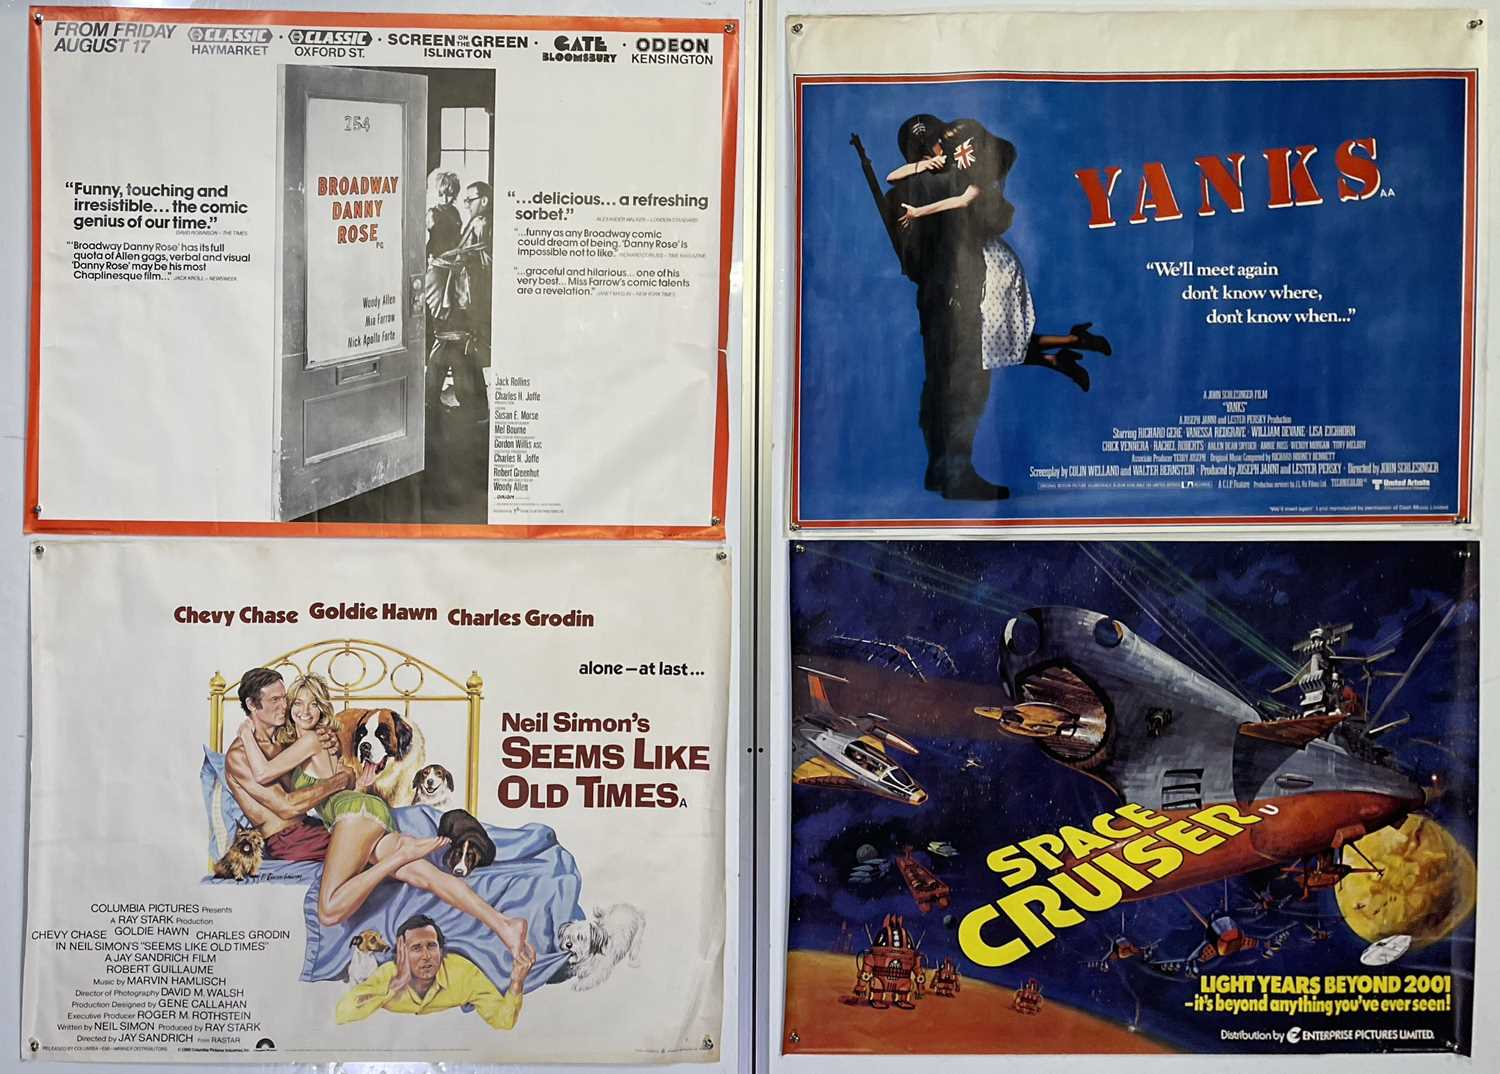 Lot 201 - 1970S UK QUAD POSTER COLLECTION.